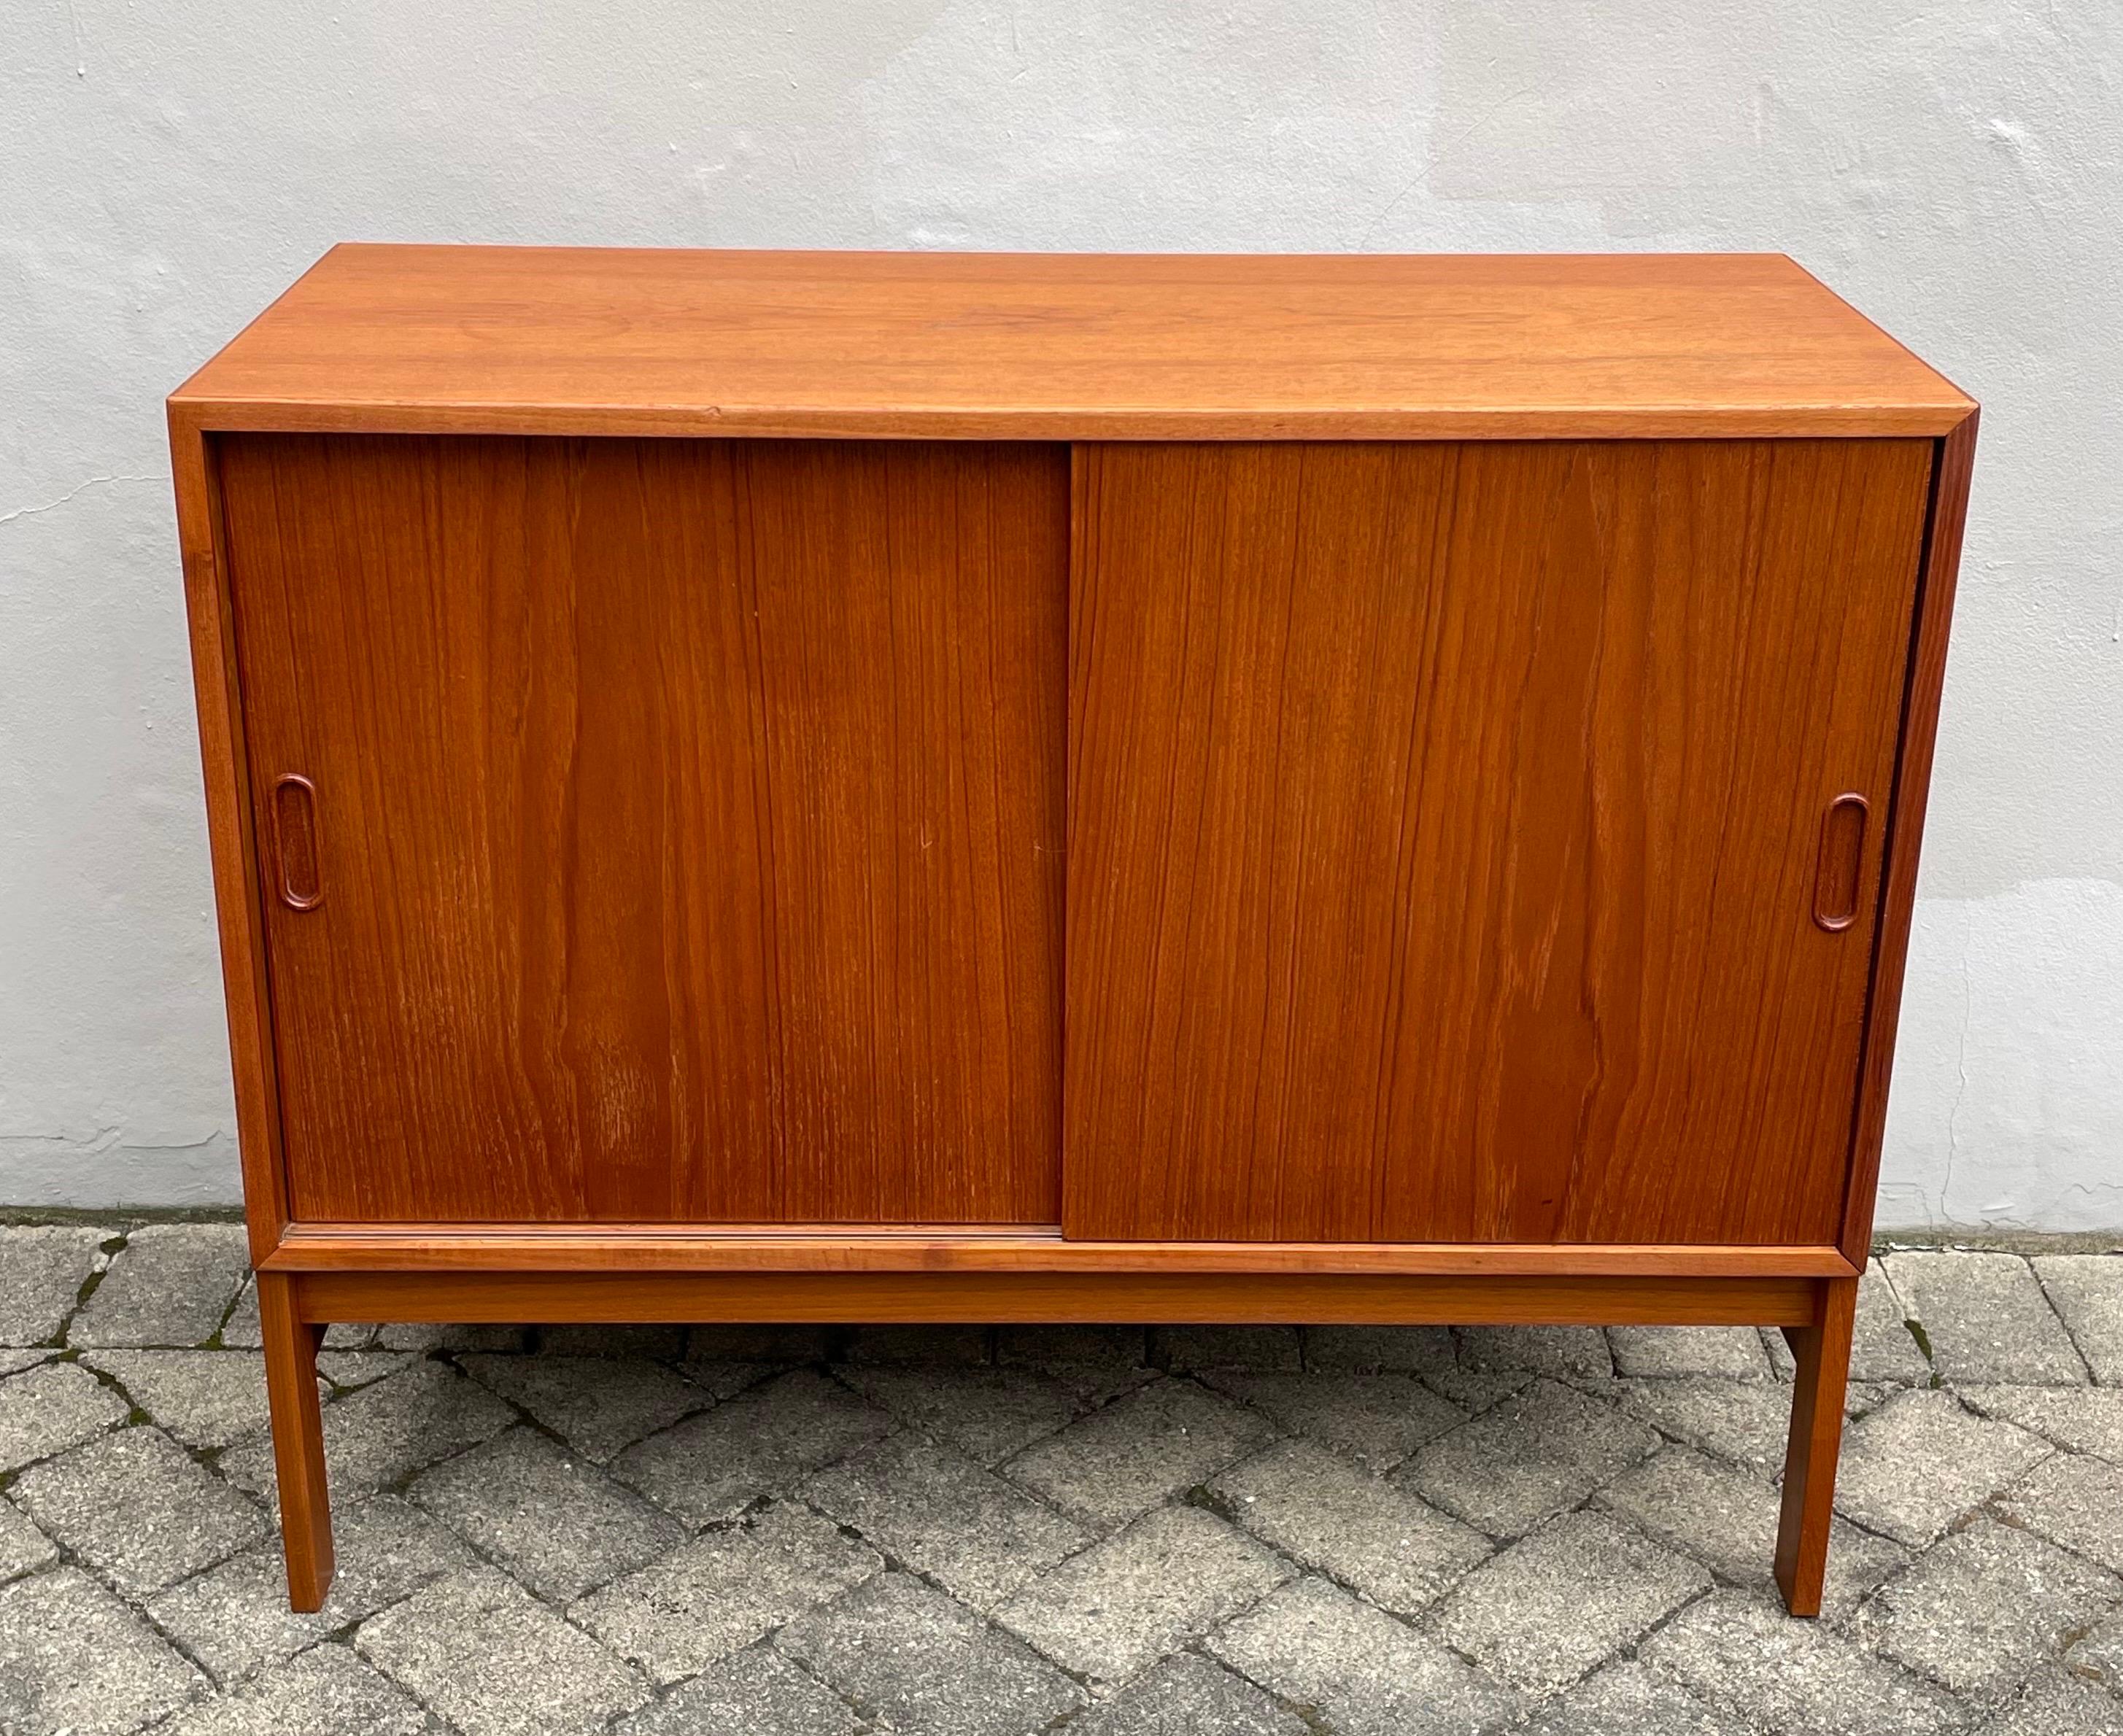 Authentic midcentury teak cabinet or small credenza by HG Furniture, Denmark. Two sliding doors with adjustable shelves. Beautiful condition with very minor surface scratches, minor repair on back leg, minor separation at one corner, please see all